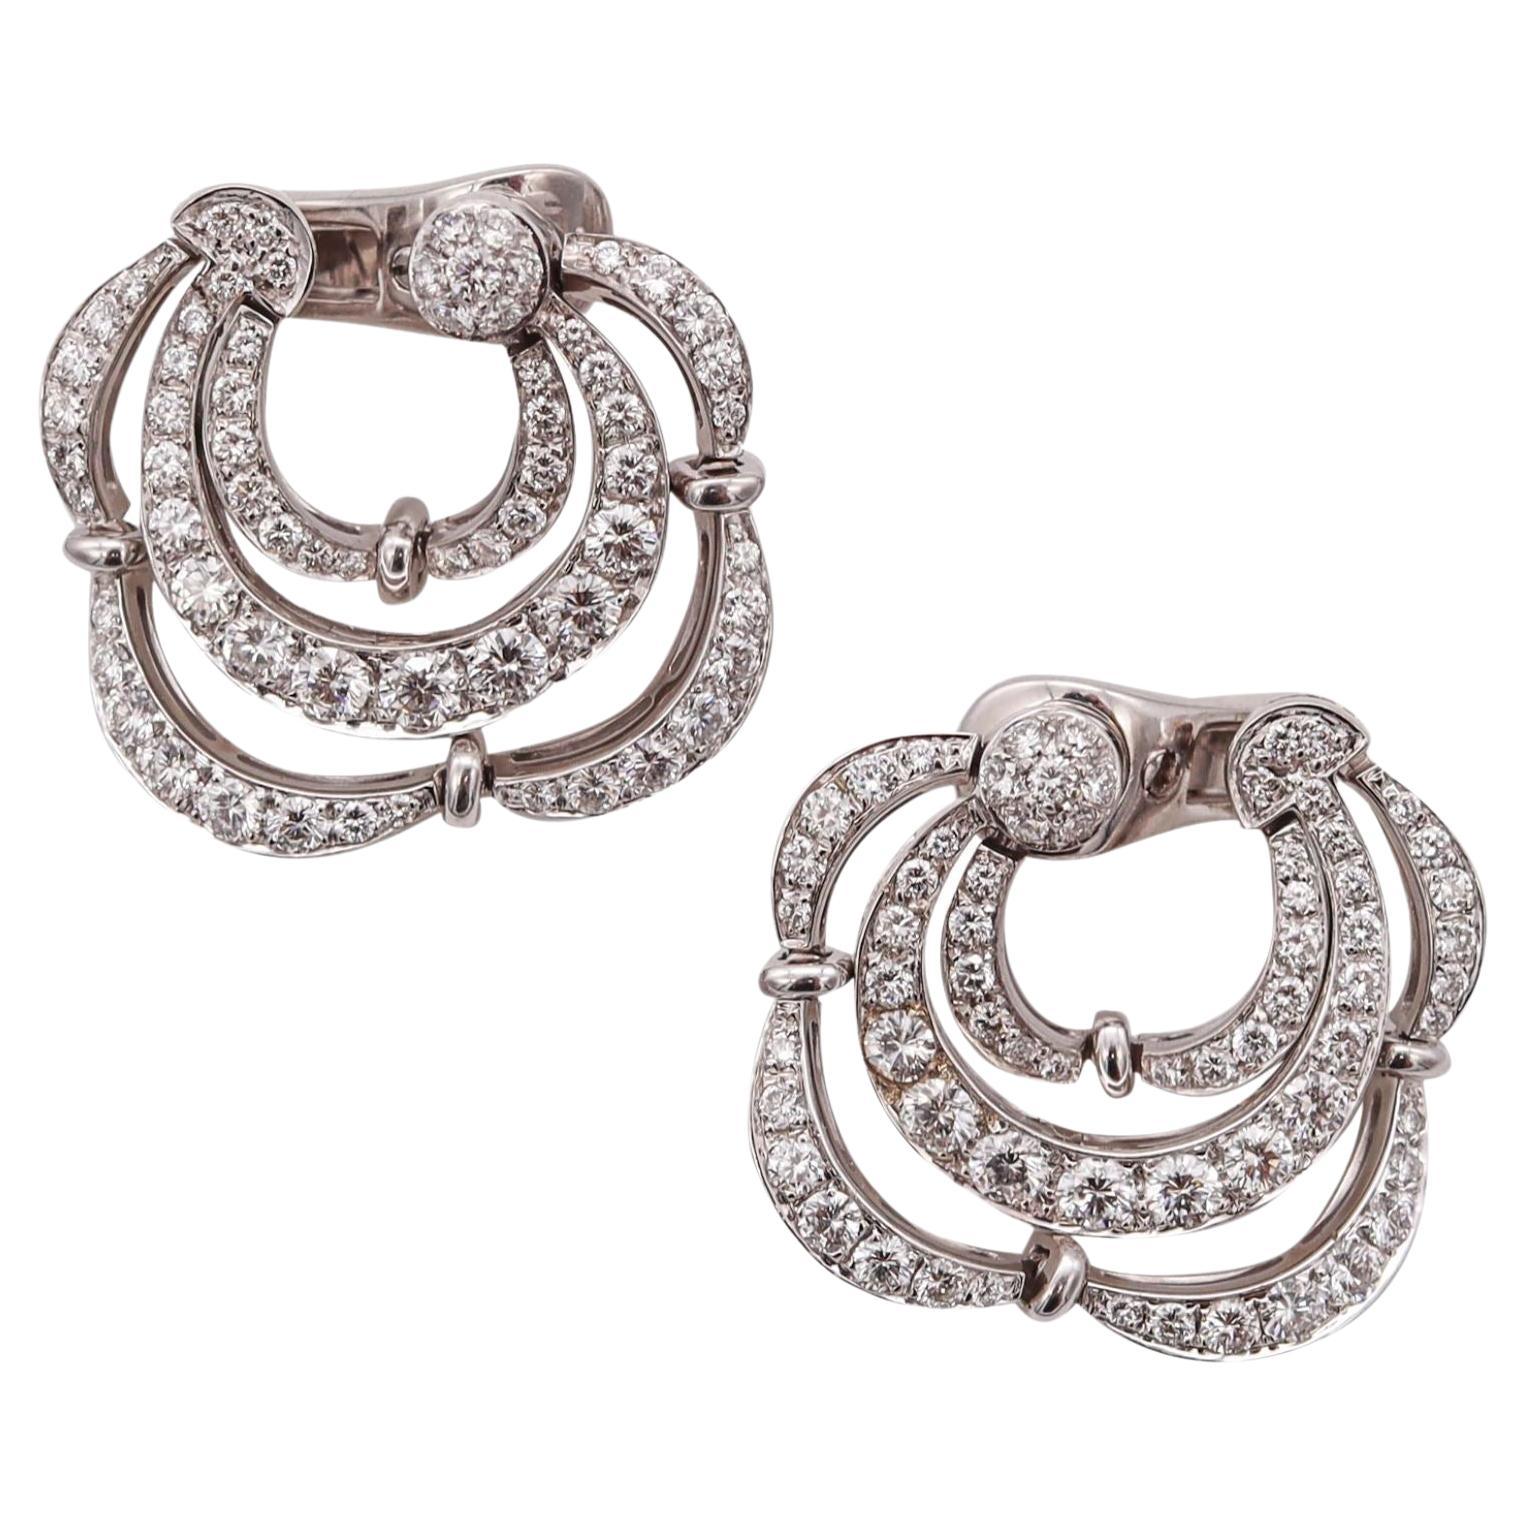 Bvlgari Roma Clips Earrings in 18 Kt White Gold with 5.76 Cts in VS Diamonds